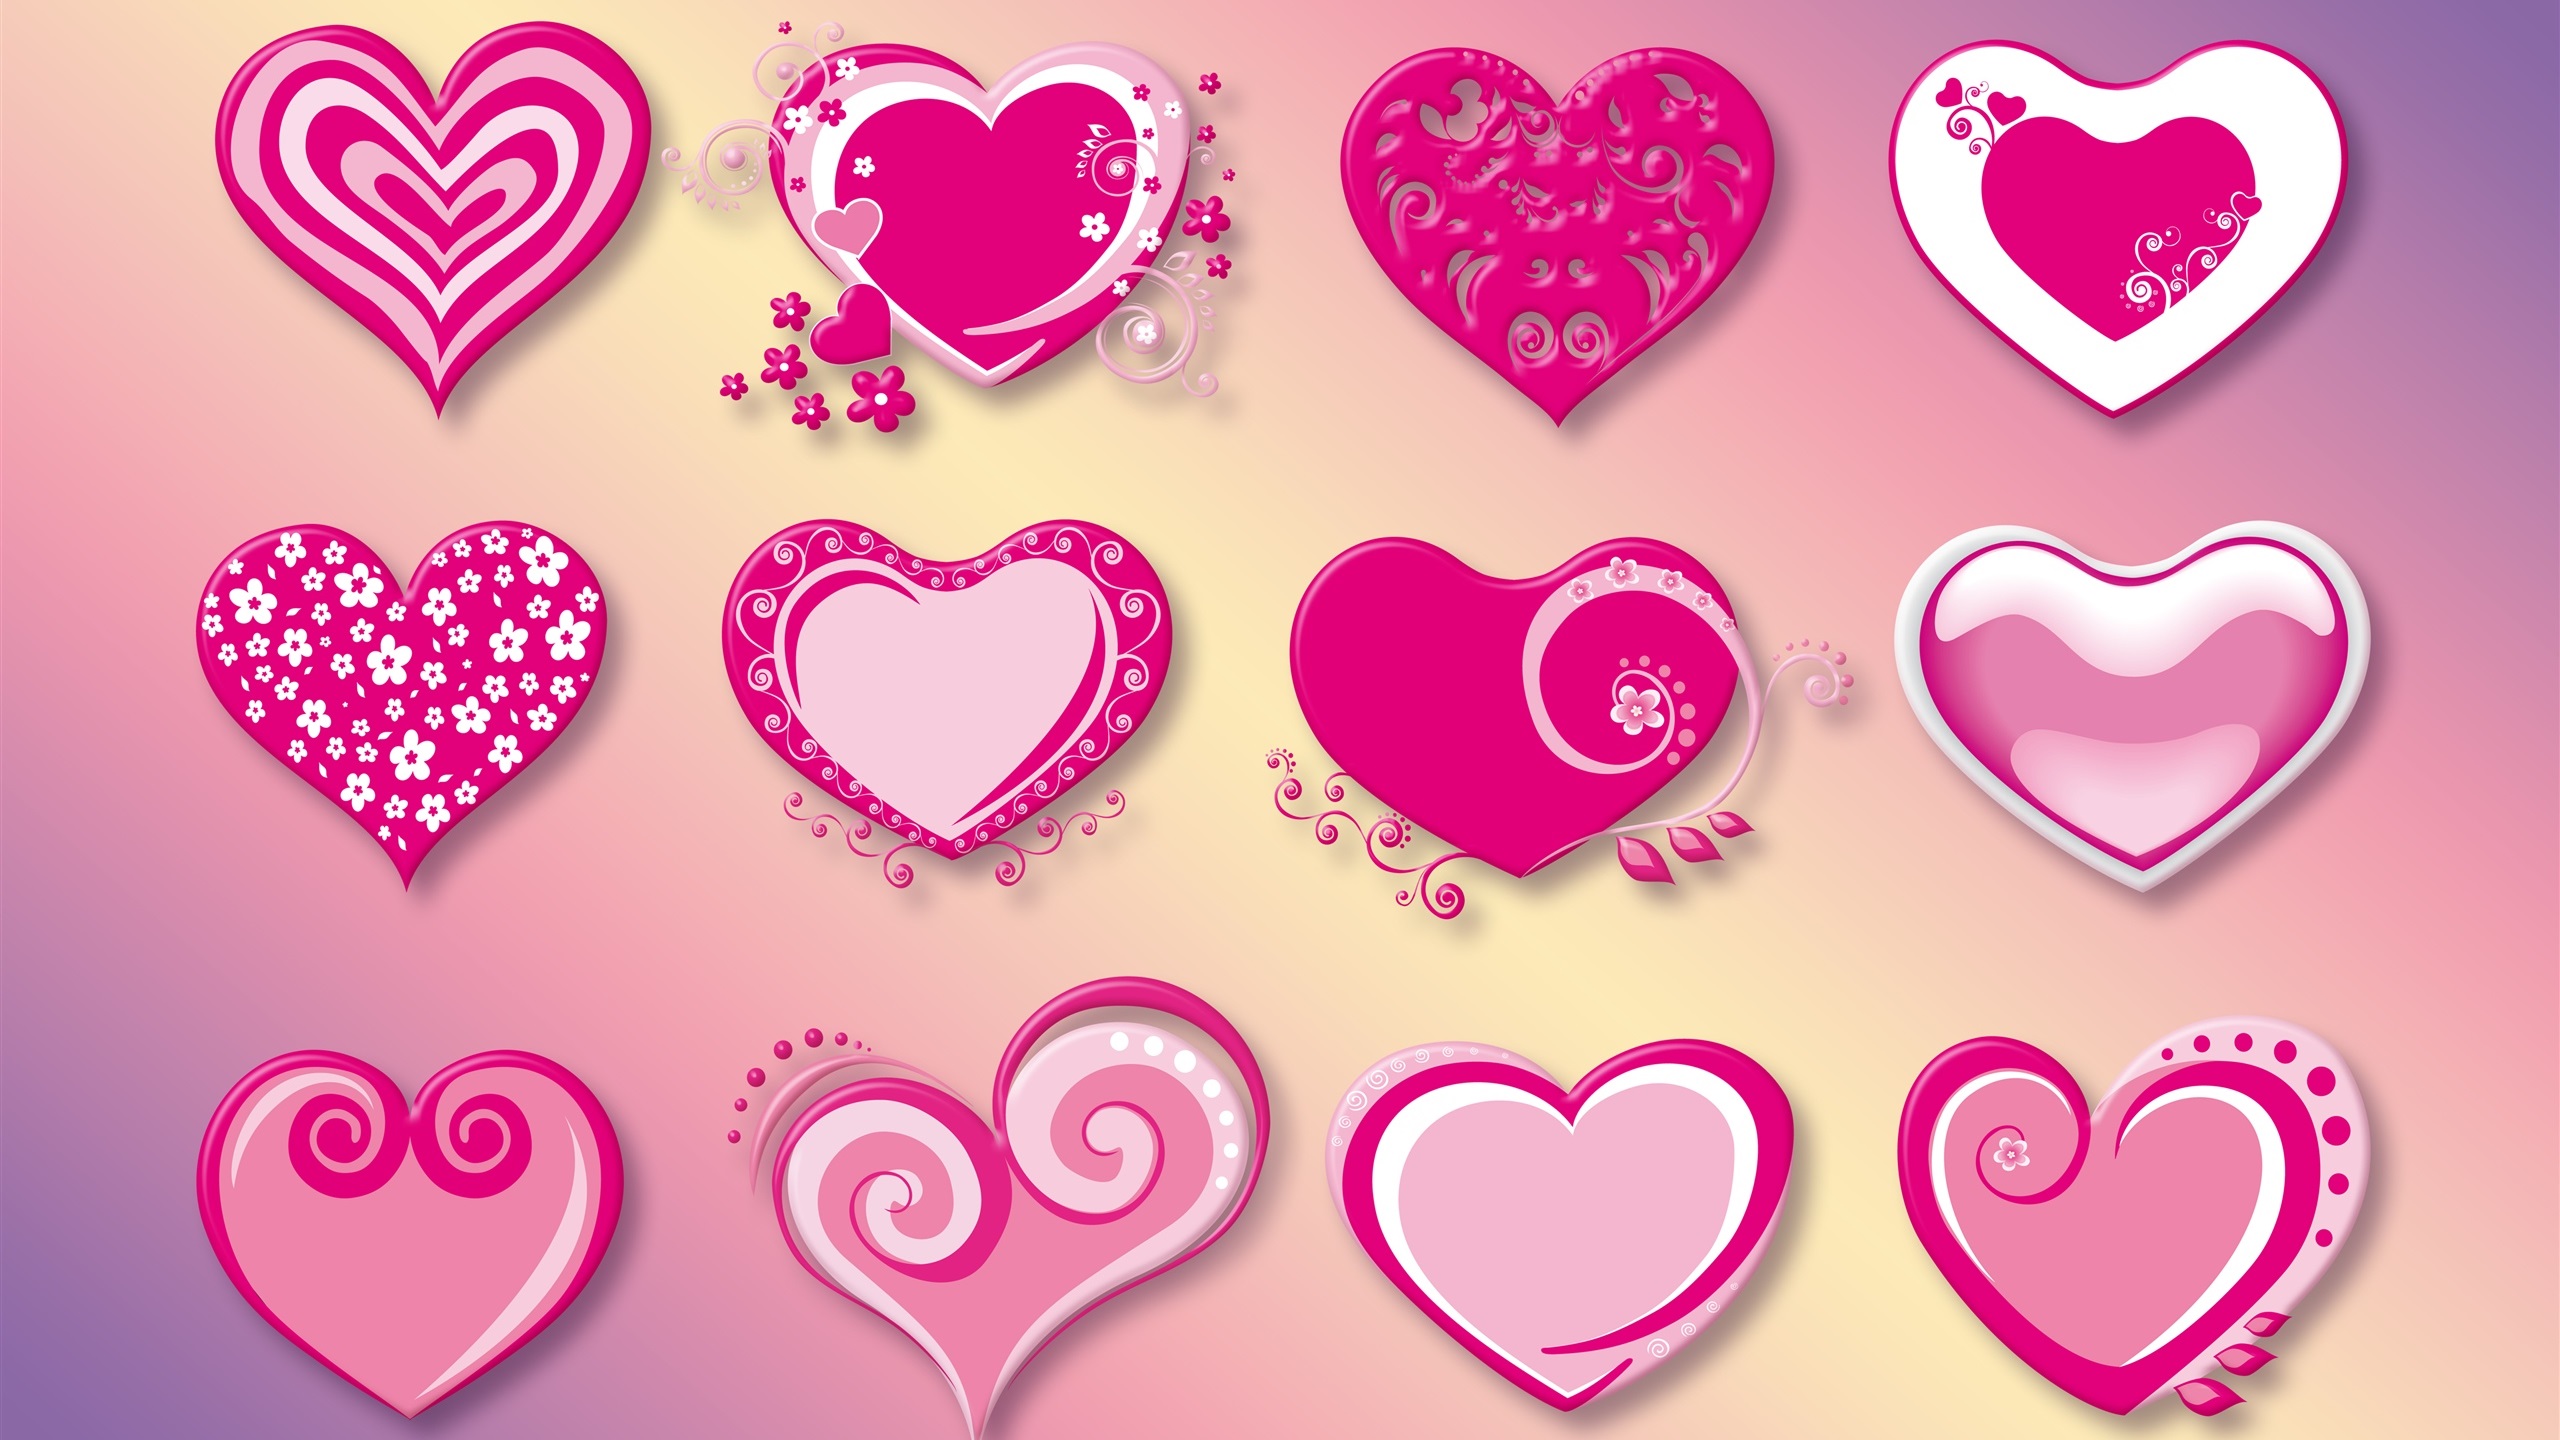 General 2560x1440 pink colorful heart (design) pattern